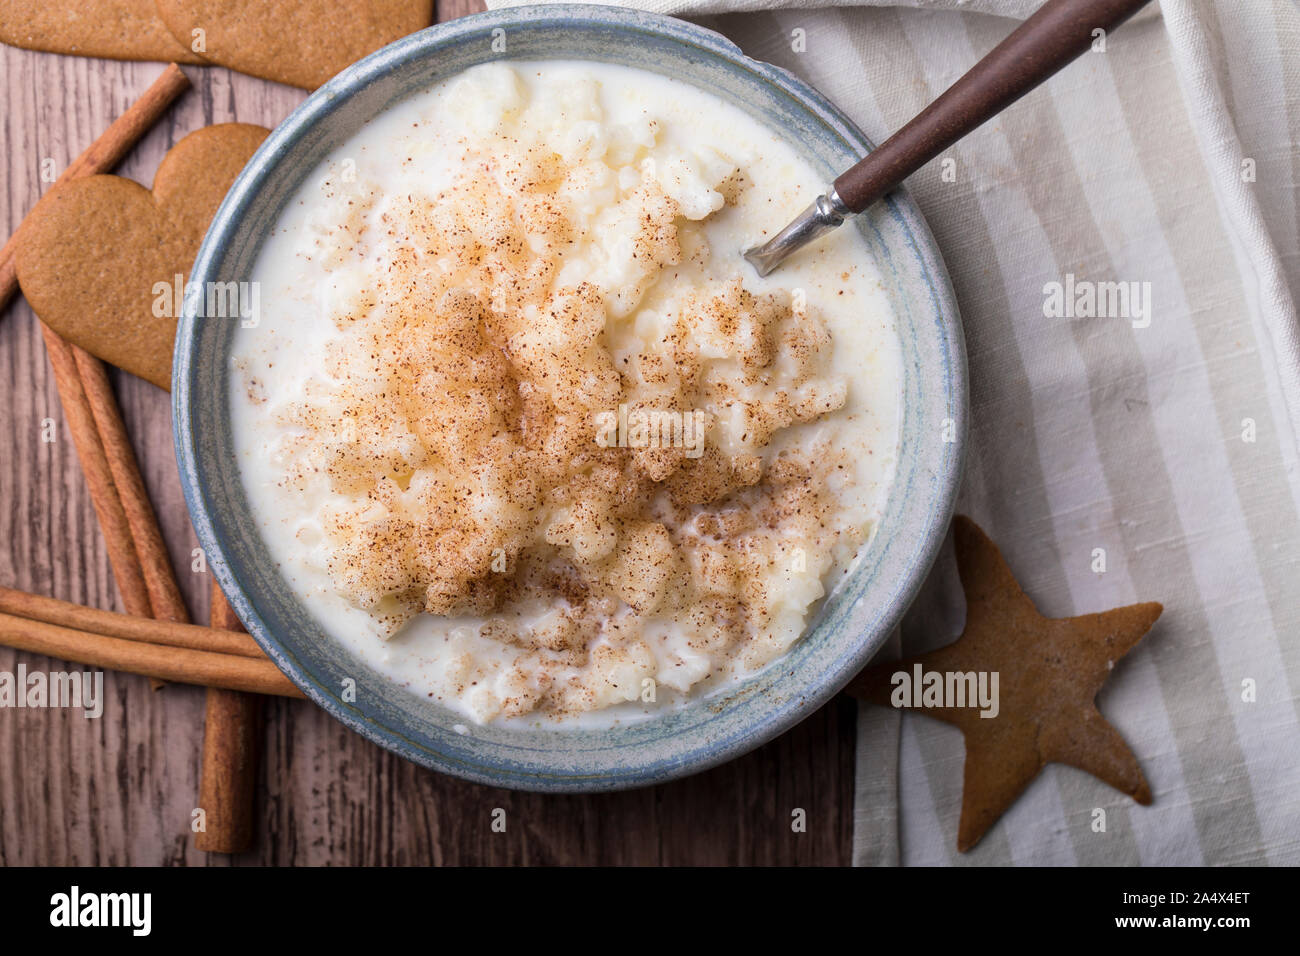 Traditional rice pudding also known as tomtegröt or swedish risgrynsgröt. The rice pudding is in a blue ceramic bowl on a wooden table, seen from abov Stock Photo